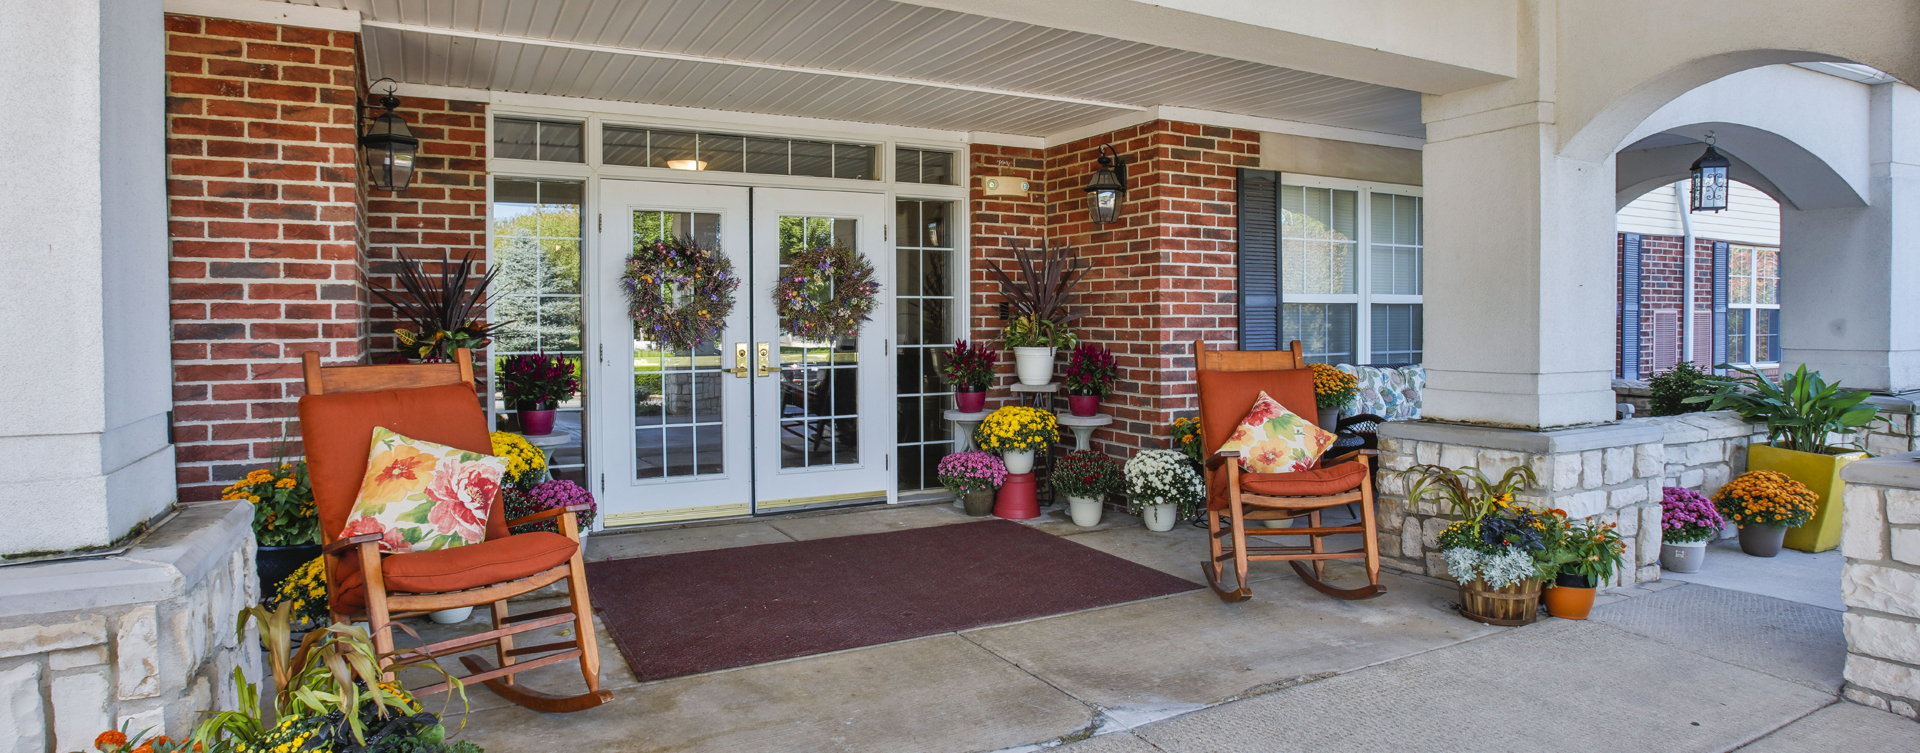 Relax in your favorite chair on the porch at Bickford of Peoria